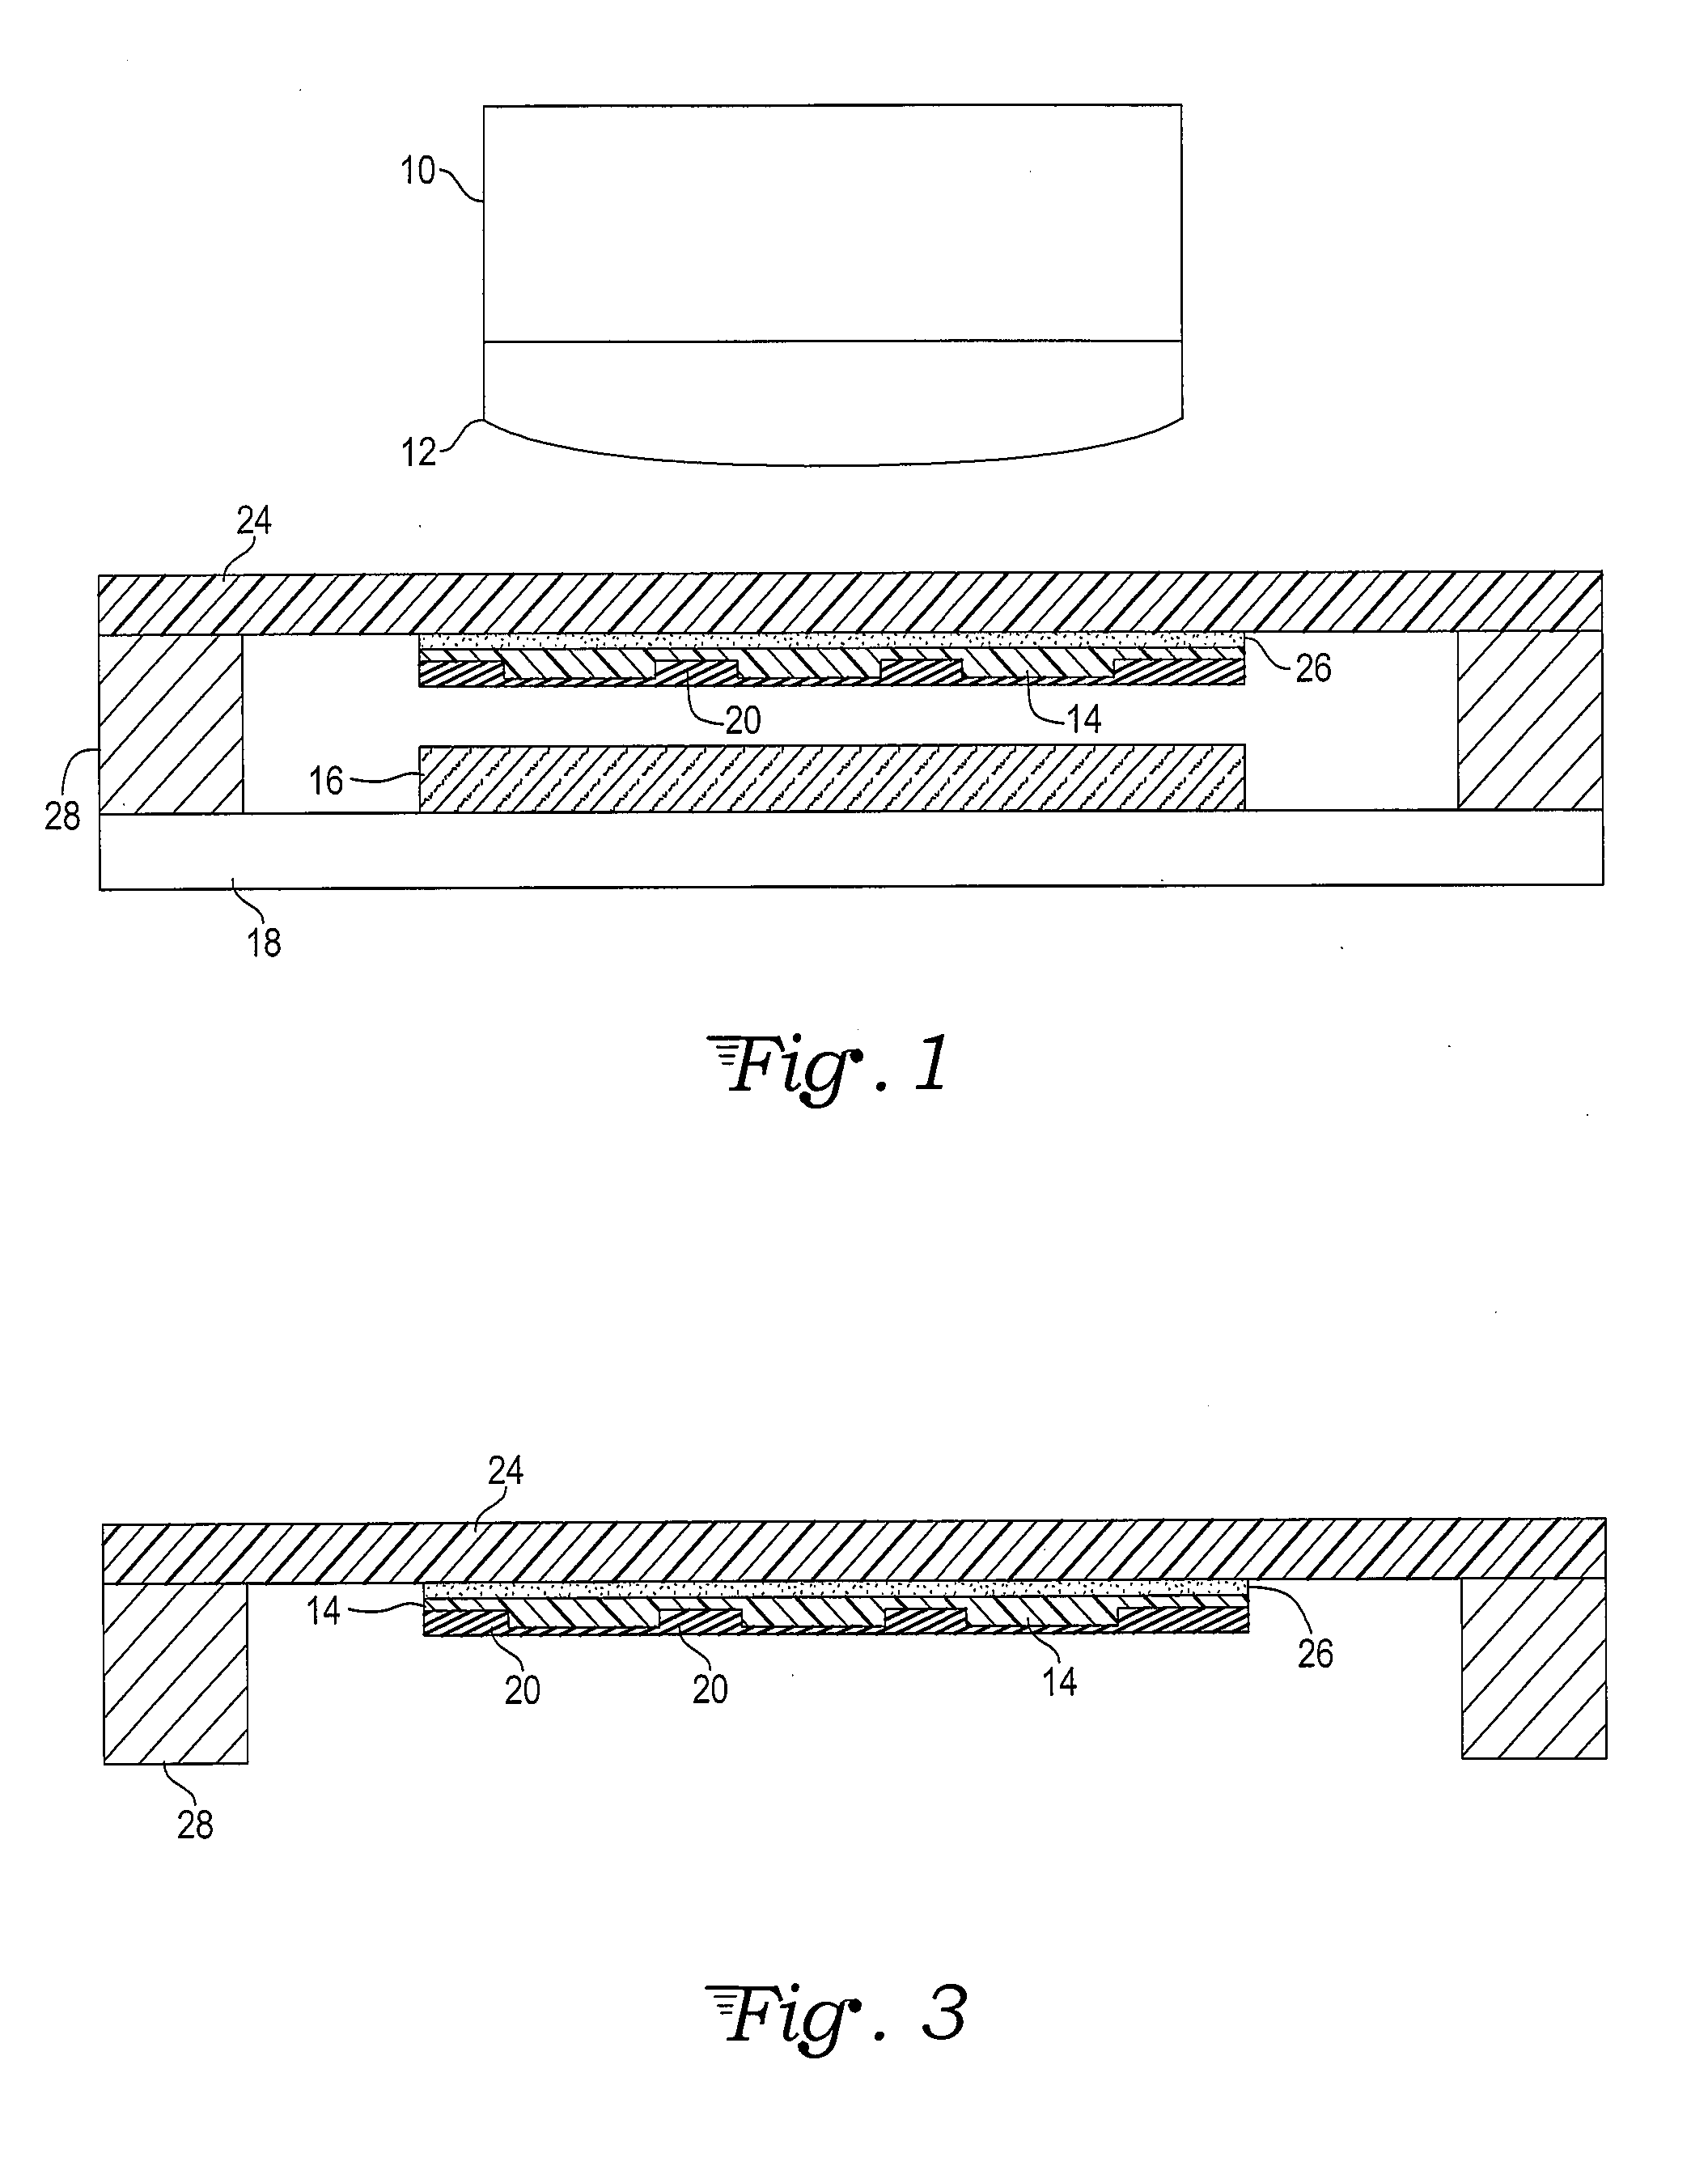 Molecular transfer lithography apparatus and method for transferring patterned materials to a substrate